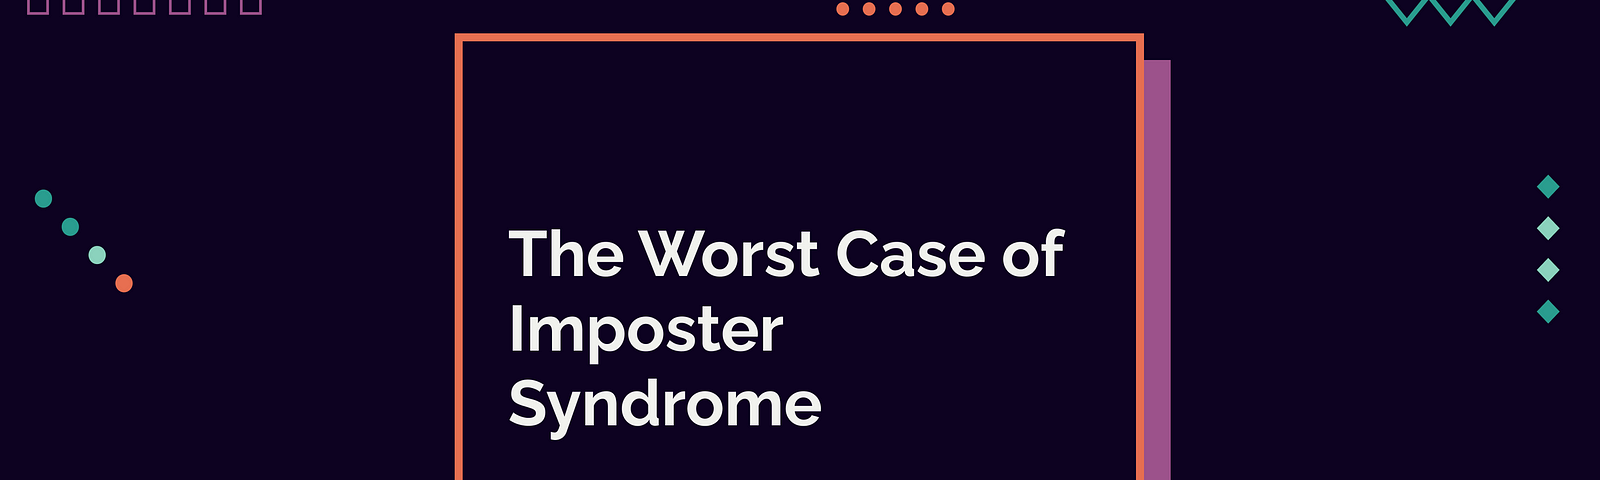 The Worst Case of Imposter Syndrome